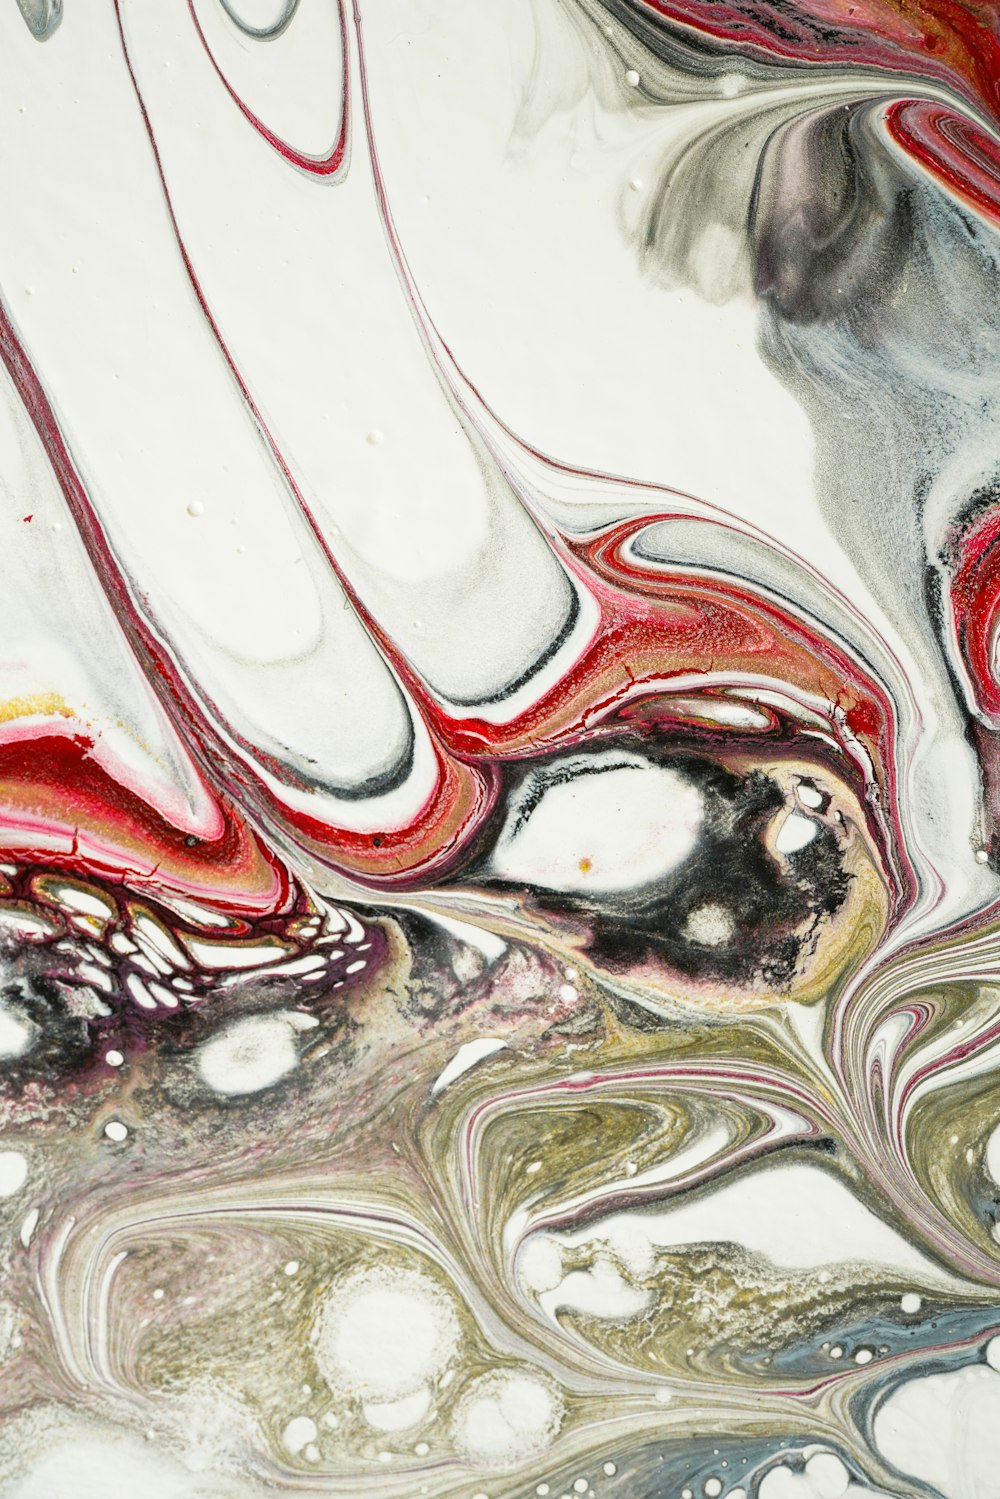 a close up of an abstract painting with red, white, and grey colors